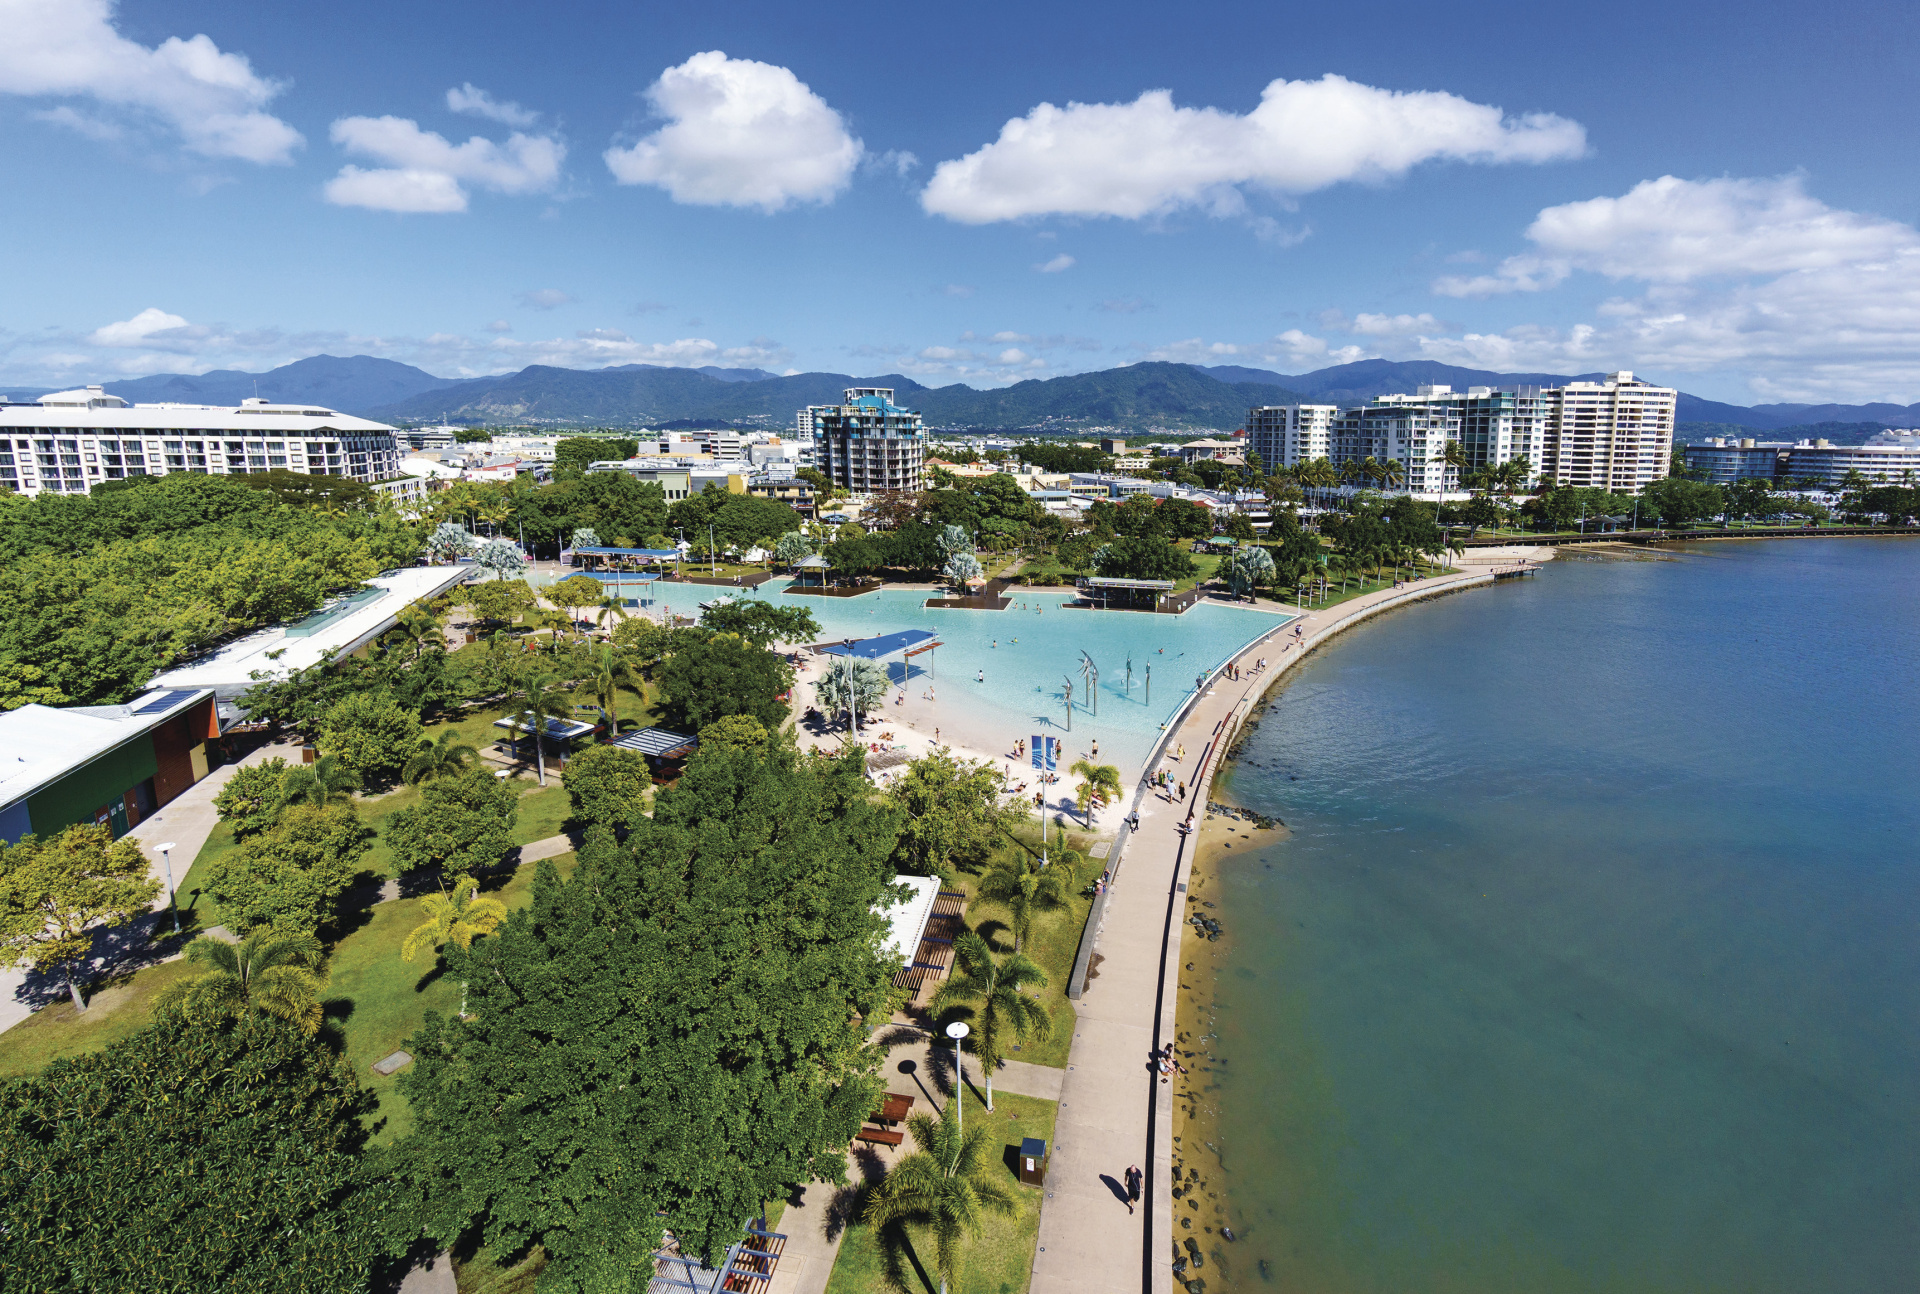 An above view of the Cairns lagoon and surrounding city.